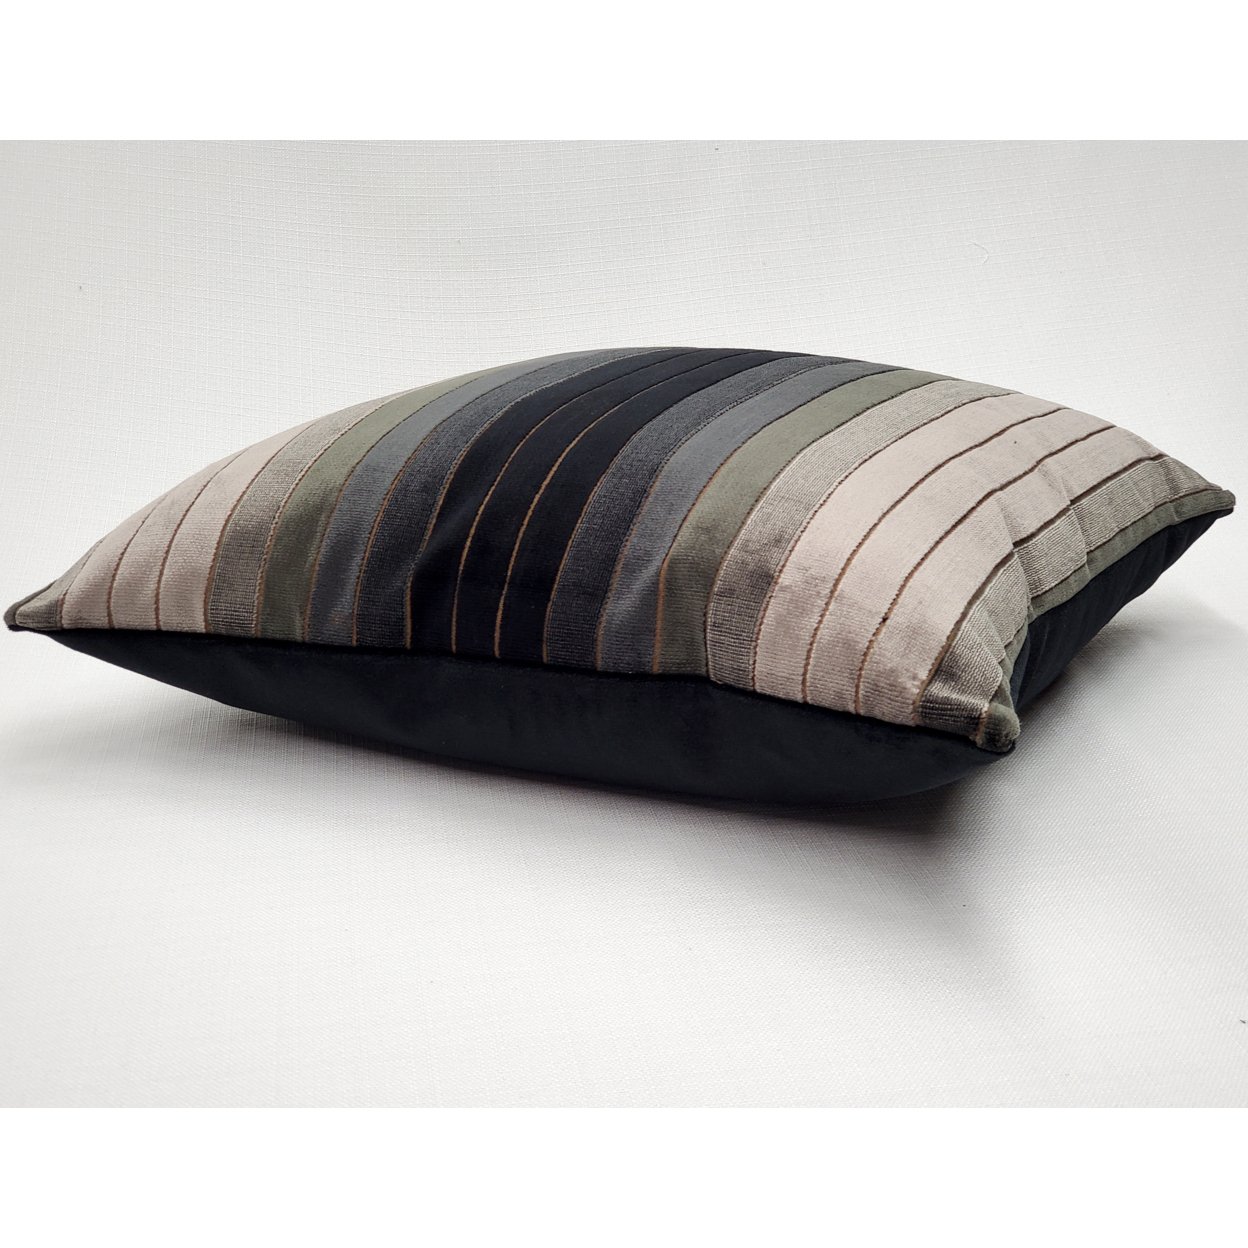 Carbon Stripes Textured Velvet Throw Pillow 20x20 Inches Square, Complete Pillow With Polyfill Pillow Insert